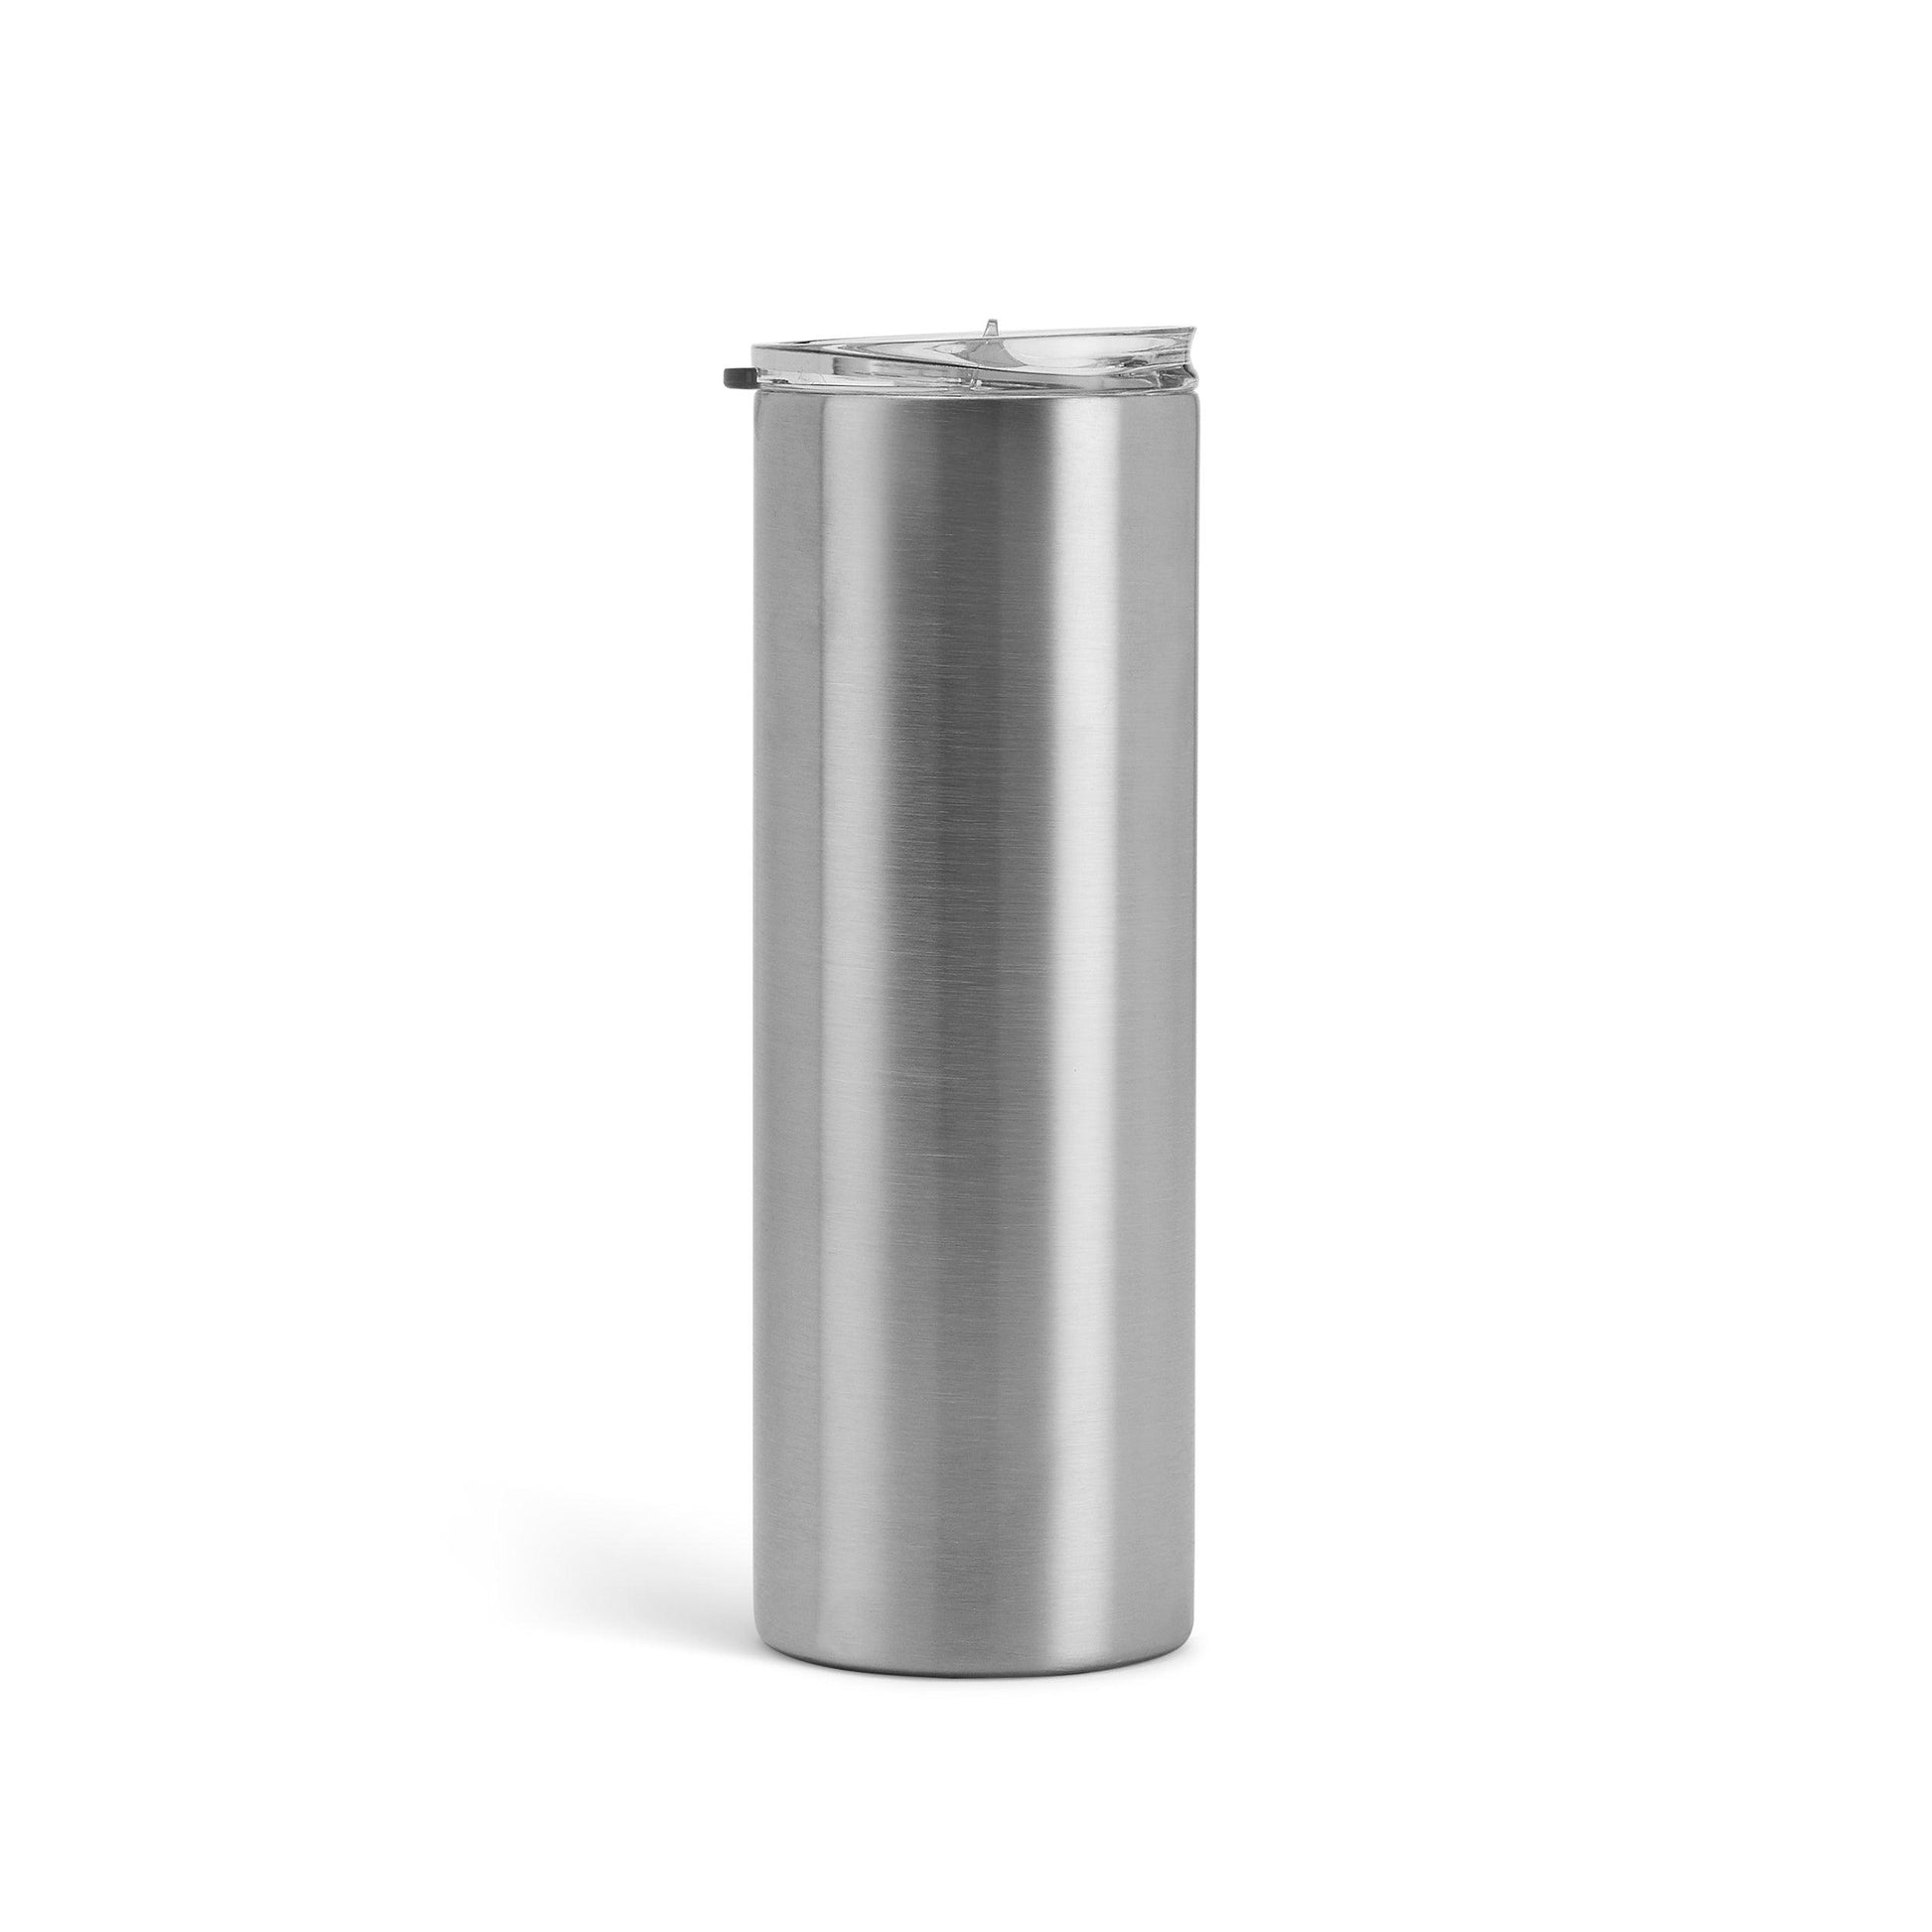 MakerFlo Destash 20 oz, 25 Pack Skinny Insulated Tumblers, Stainless Steel, Silver